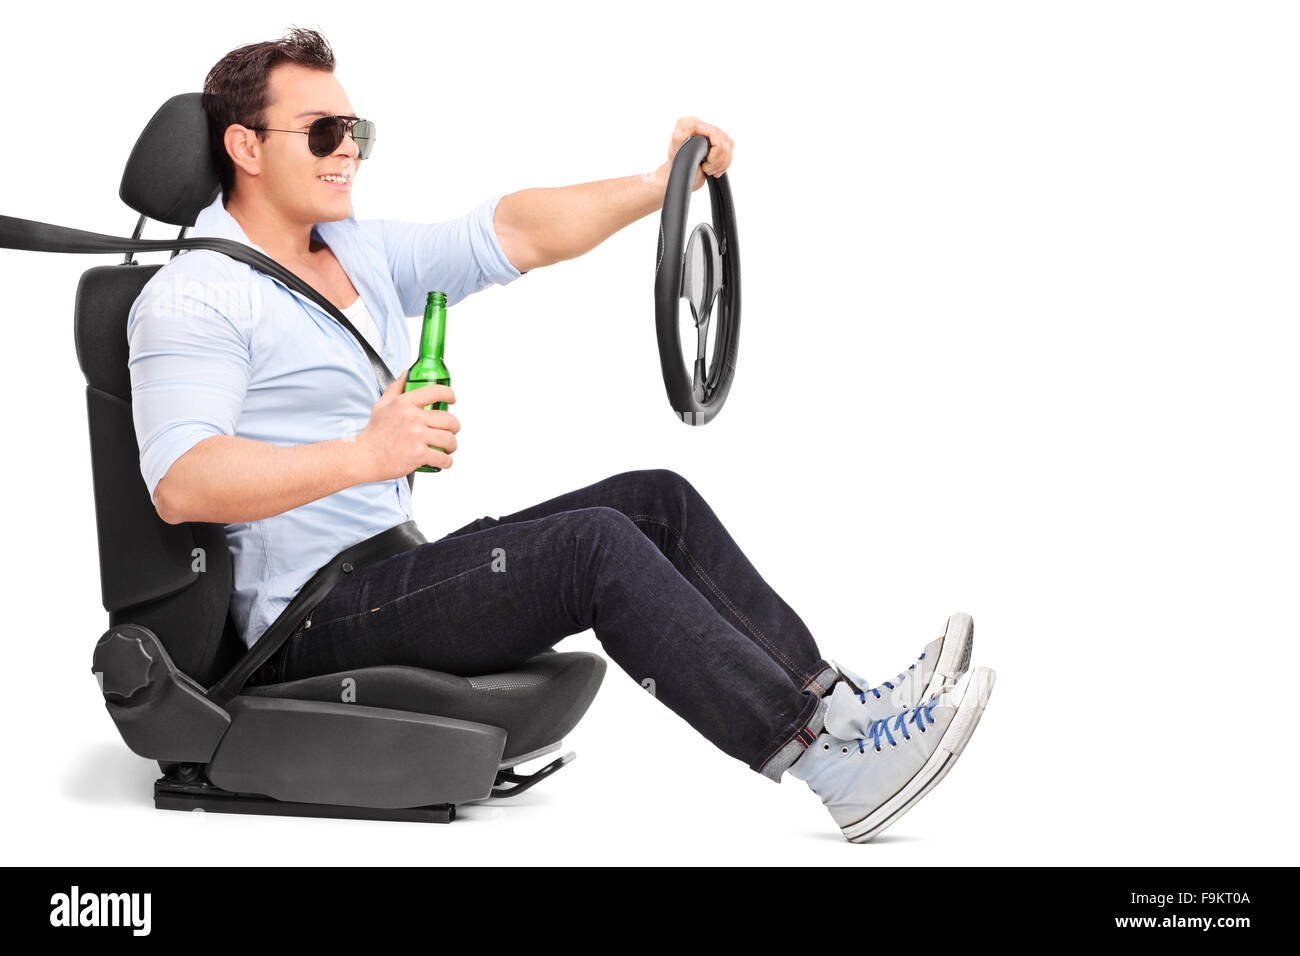 Careless young man driving and holding a bottle of beer isolated on white background Stock Photo